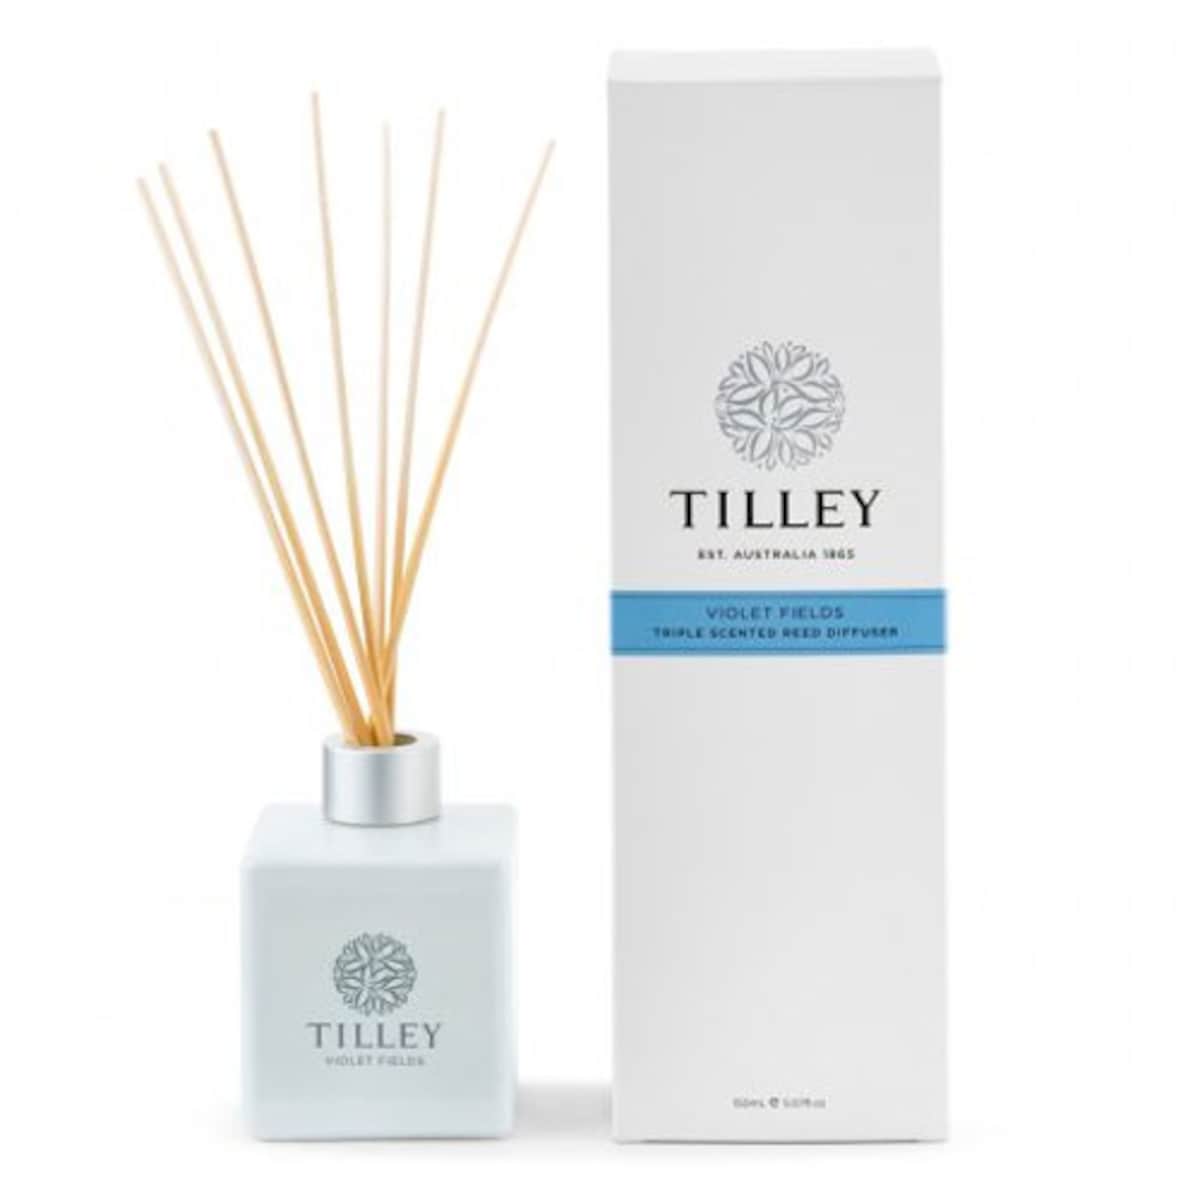 Tilley Reed Diffuser Violet Fields 150Ml